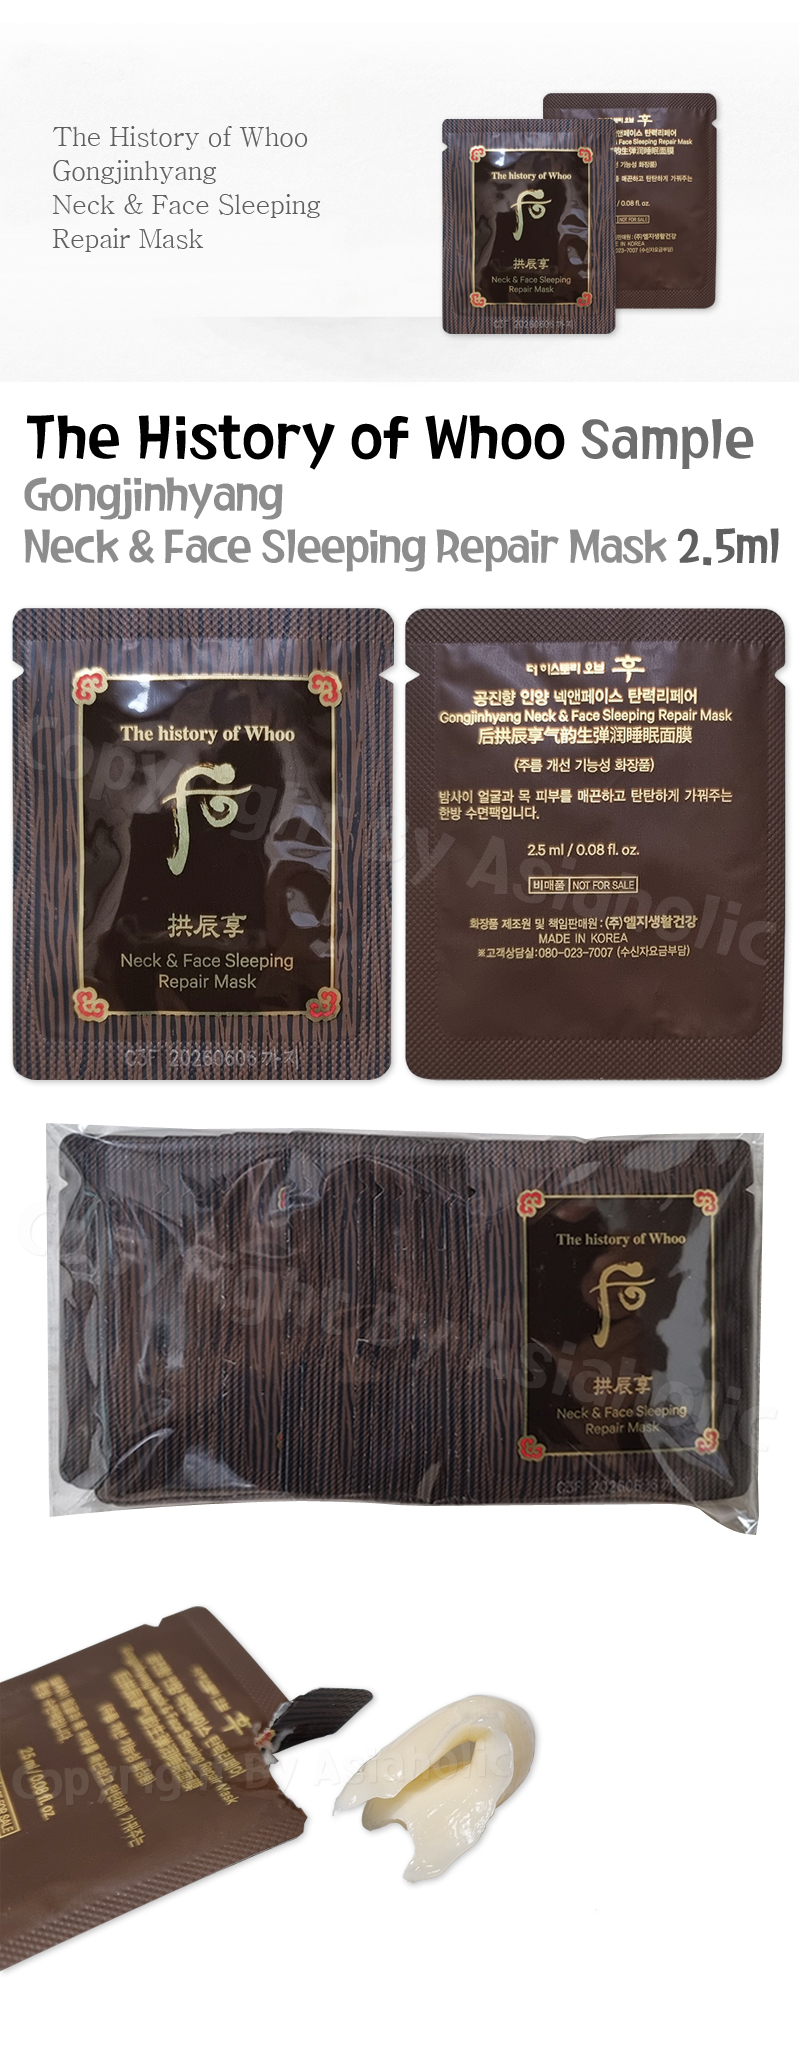 The history of Whoo Neck & Face Sleeping Repair Mask 2.5ml x 20pcs (50ml) Sample Newest Version